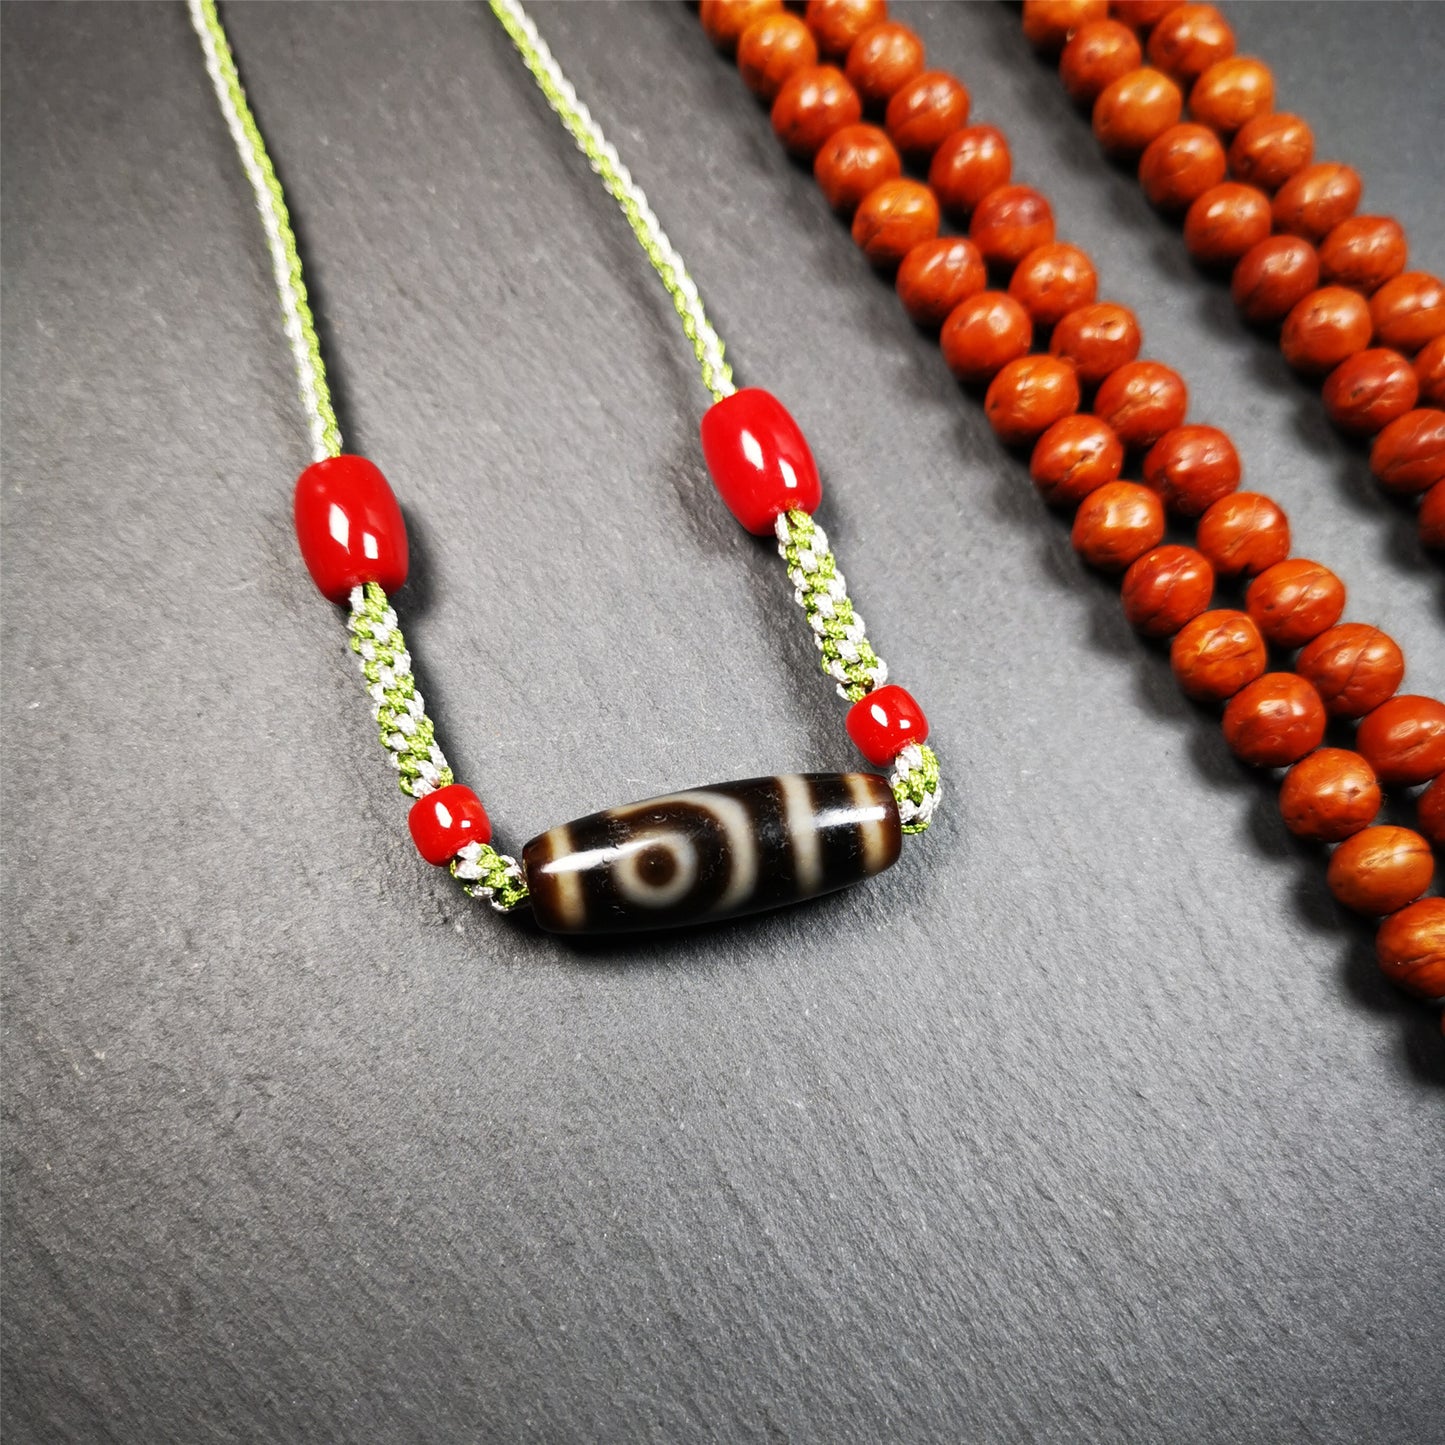 This necklace was hand-woven by Tibetans from Baiyu County, the main bead is a 2 eyed dzi bead, paired with agate beads,about 30 years old. It can be worn as a fashionable accessory, also holds cultural and religious significance.